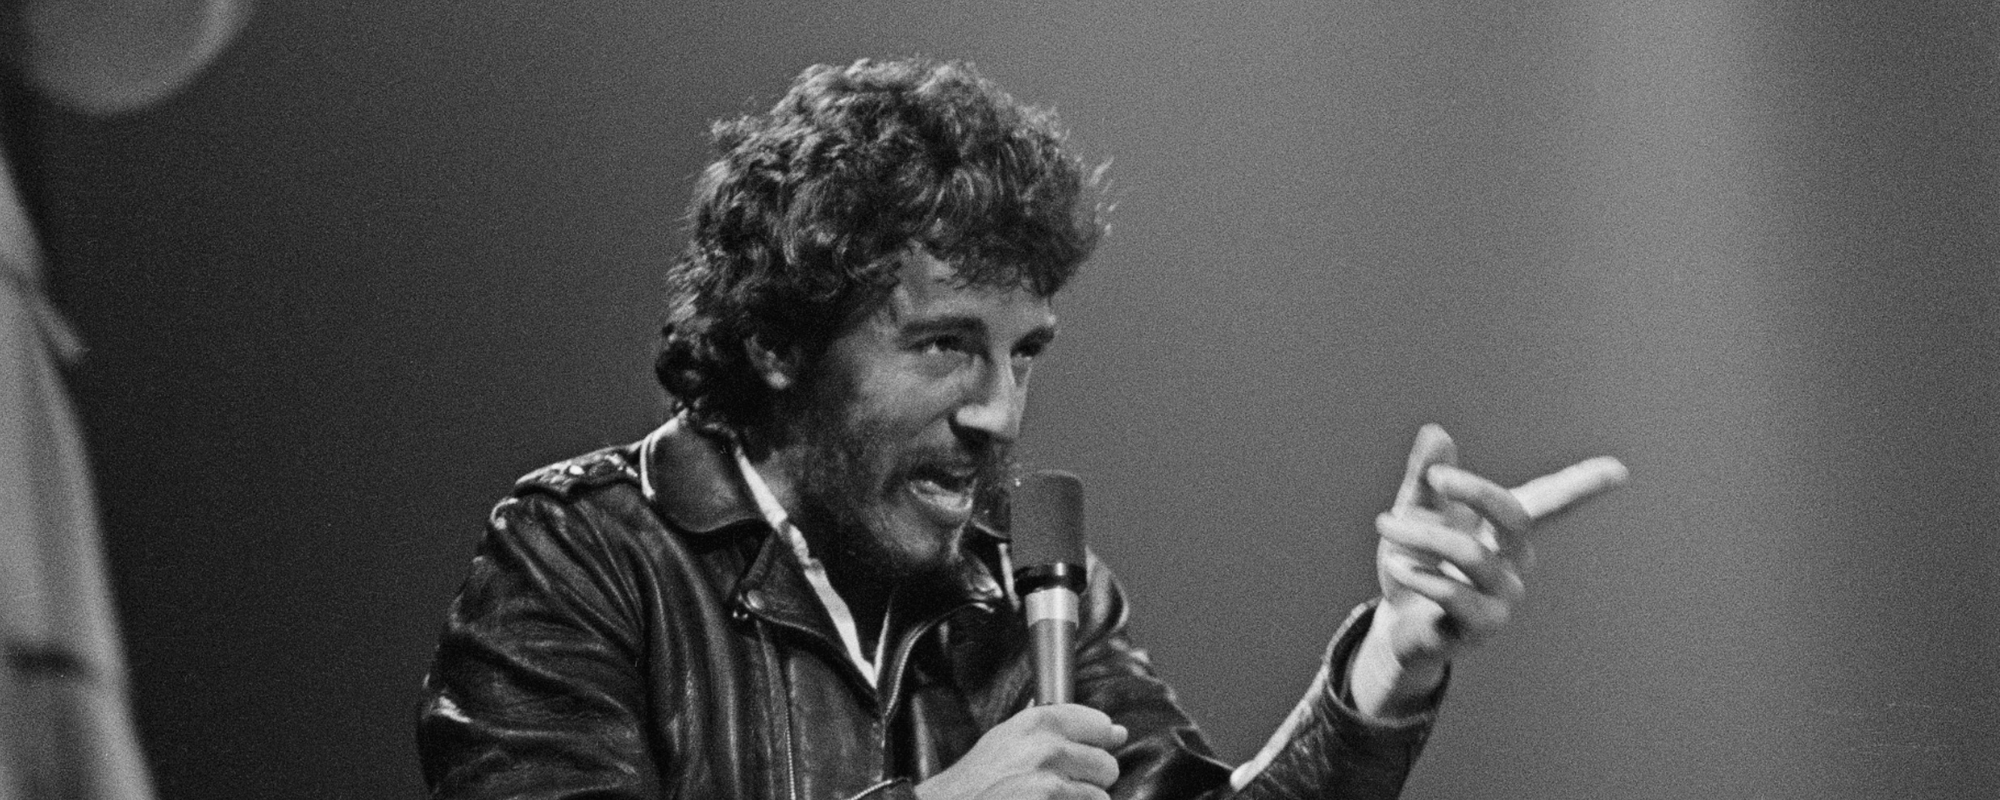 Hot Rods, Highways, and High Drama: The Meaning Behind Bruce Springsteen’s “Born to Run”